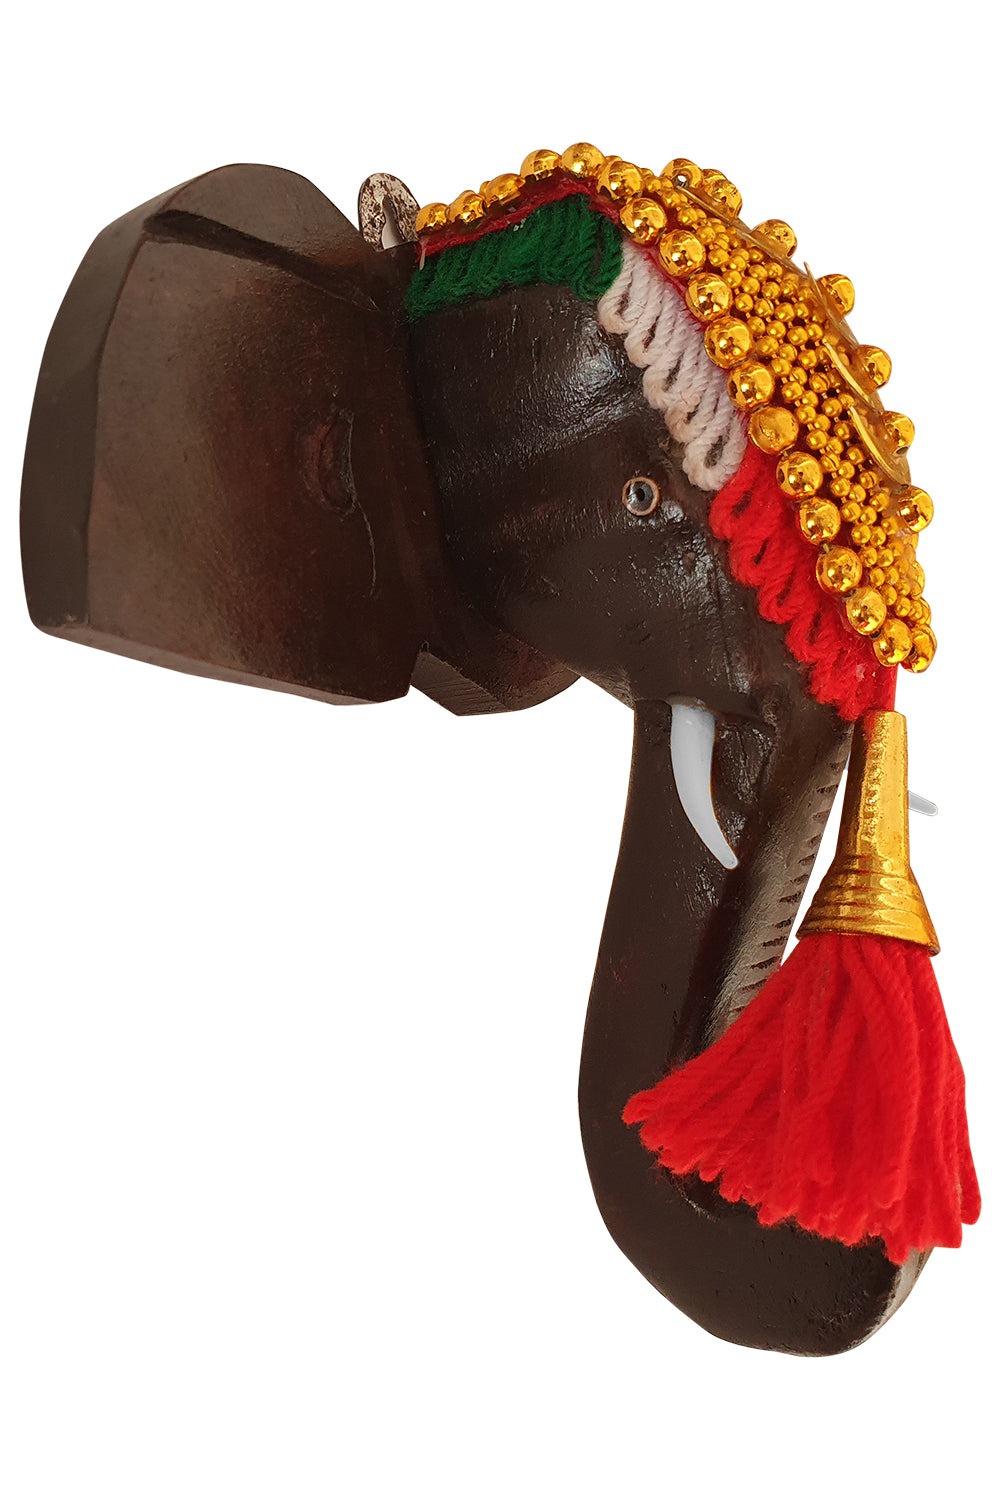 Southloom Handmade Temple Elephant Head Handicraft (Carved from Mahogany Wood) 6 Inches